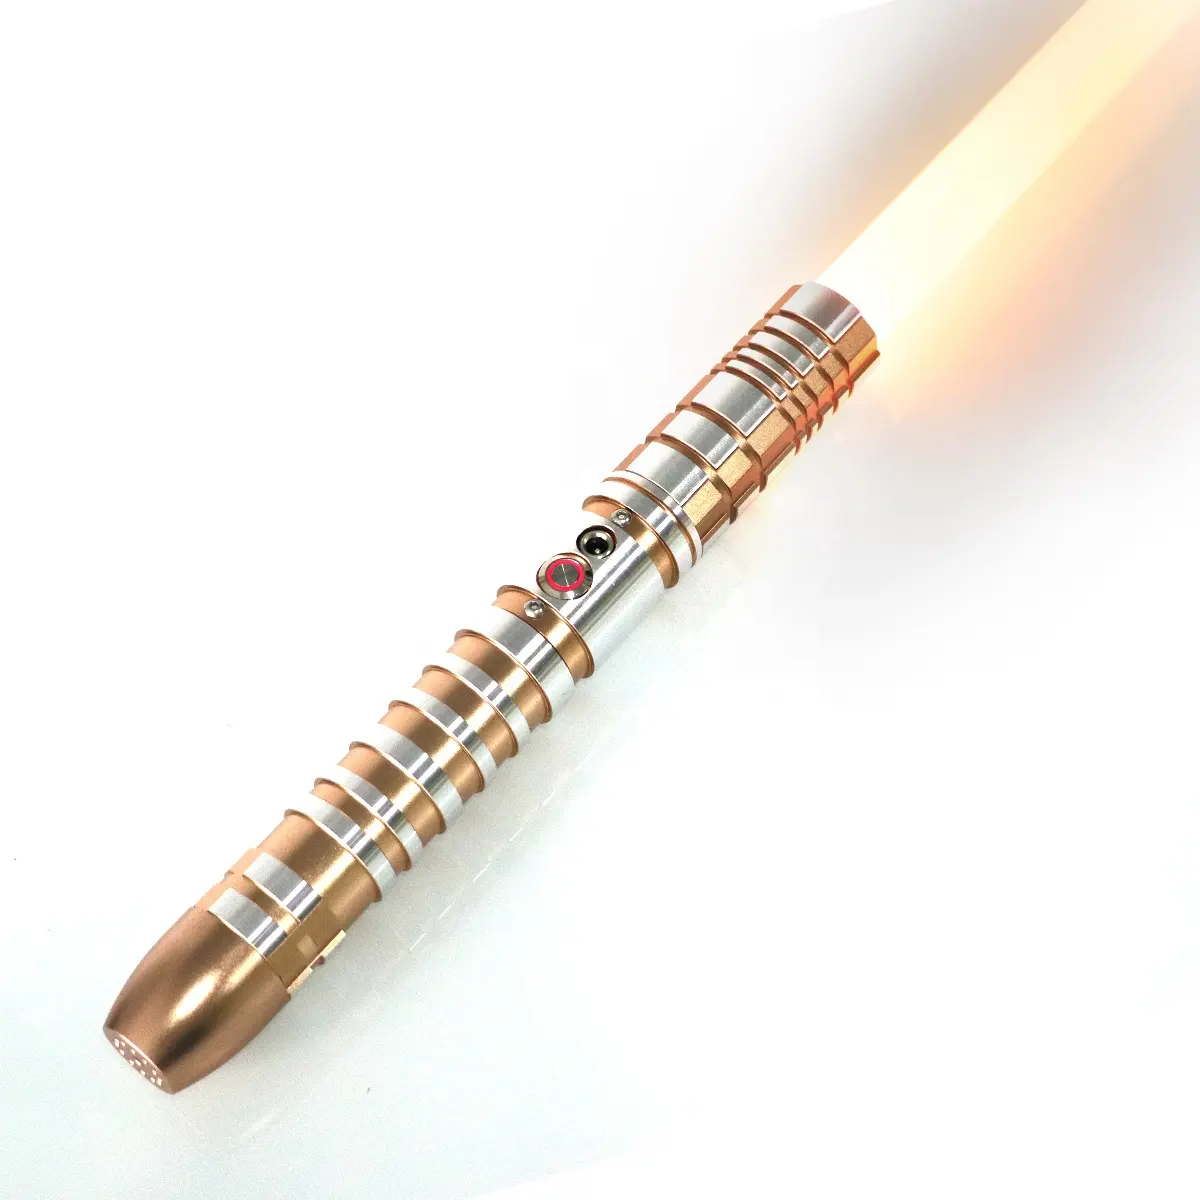 LGT SABERSTUDIO metal hilt infinite color changing heavy dueling lightsaber with smooth swing blaster lock up flash on clash 9 f